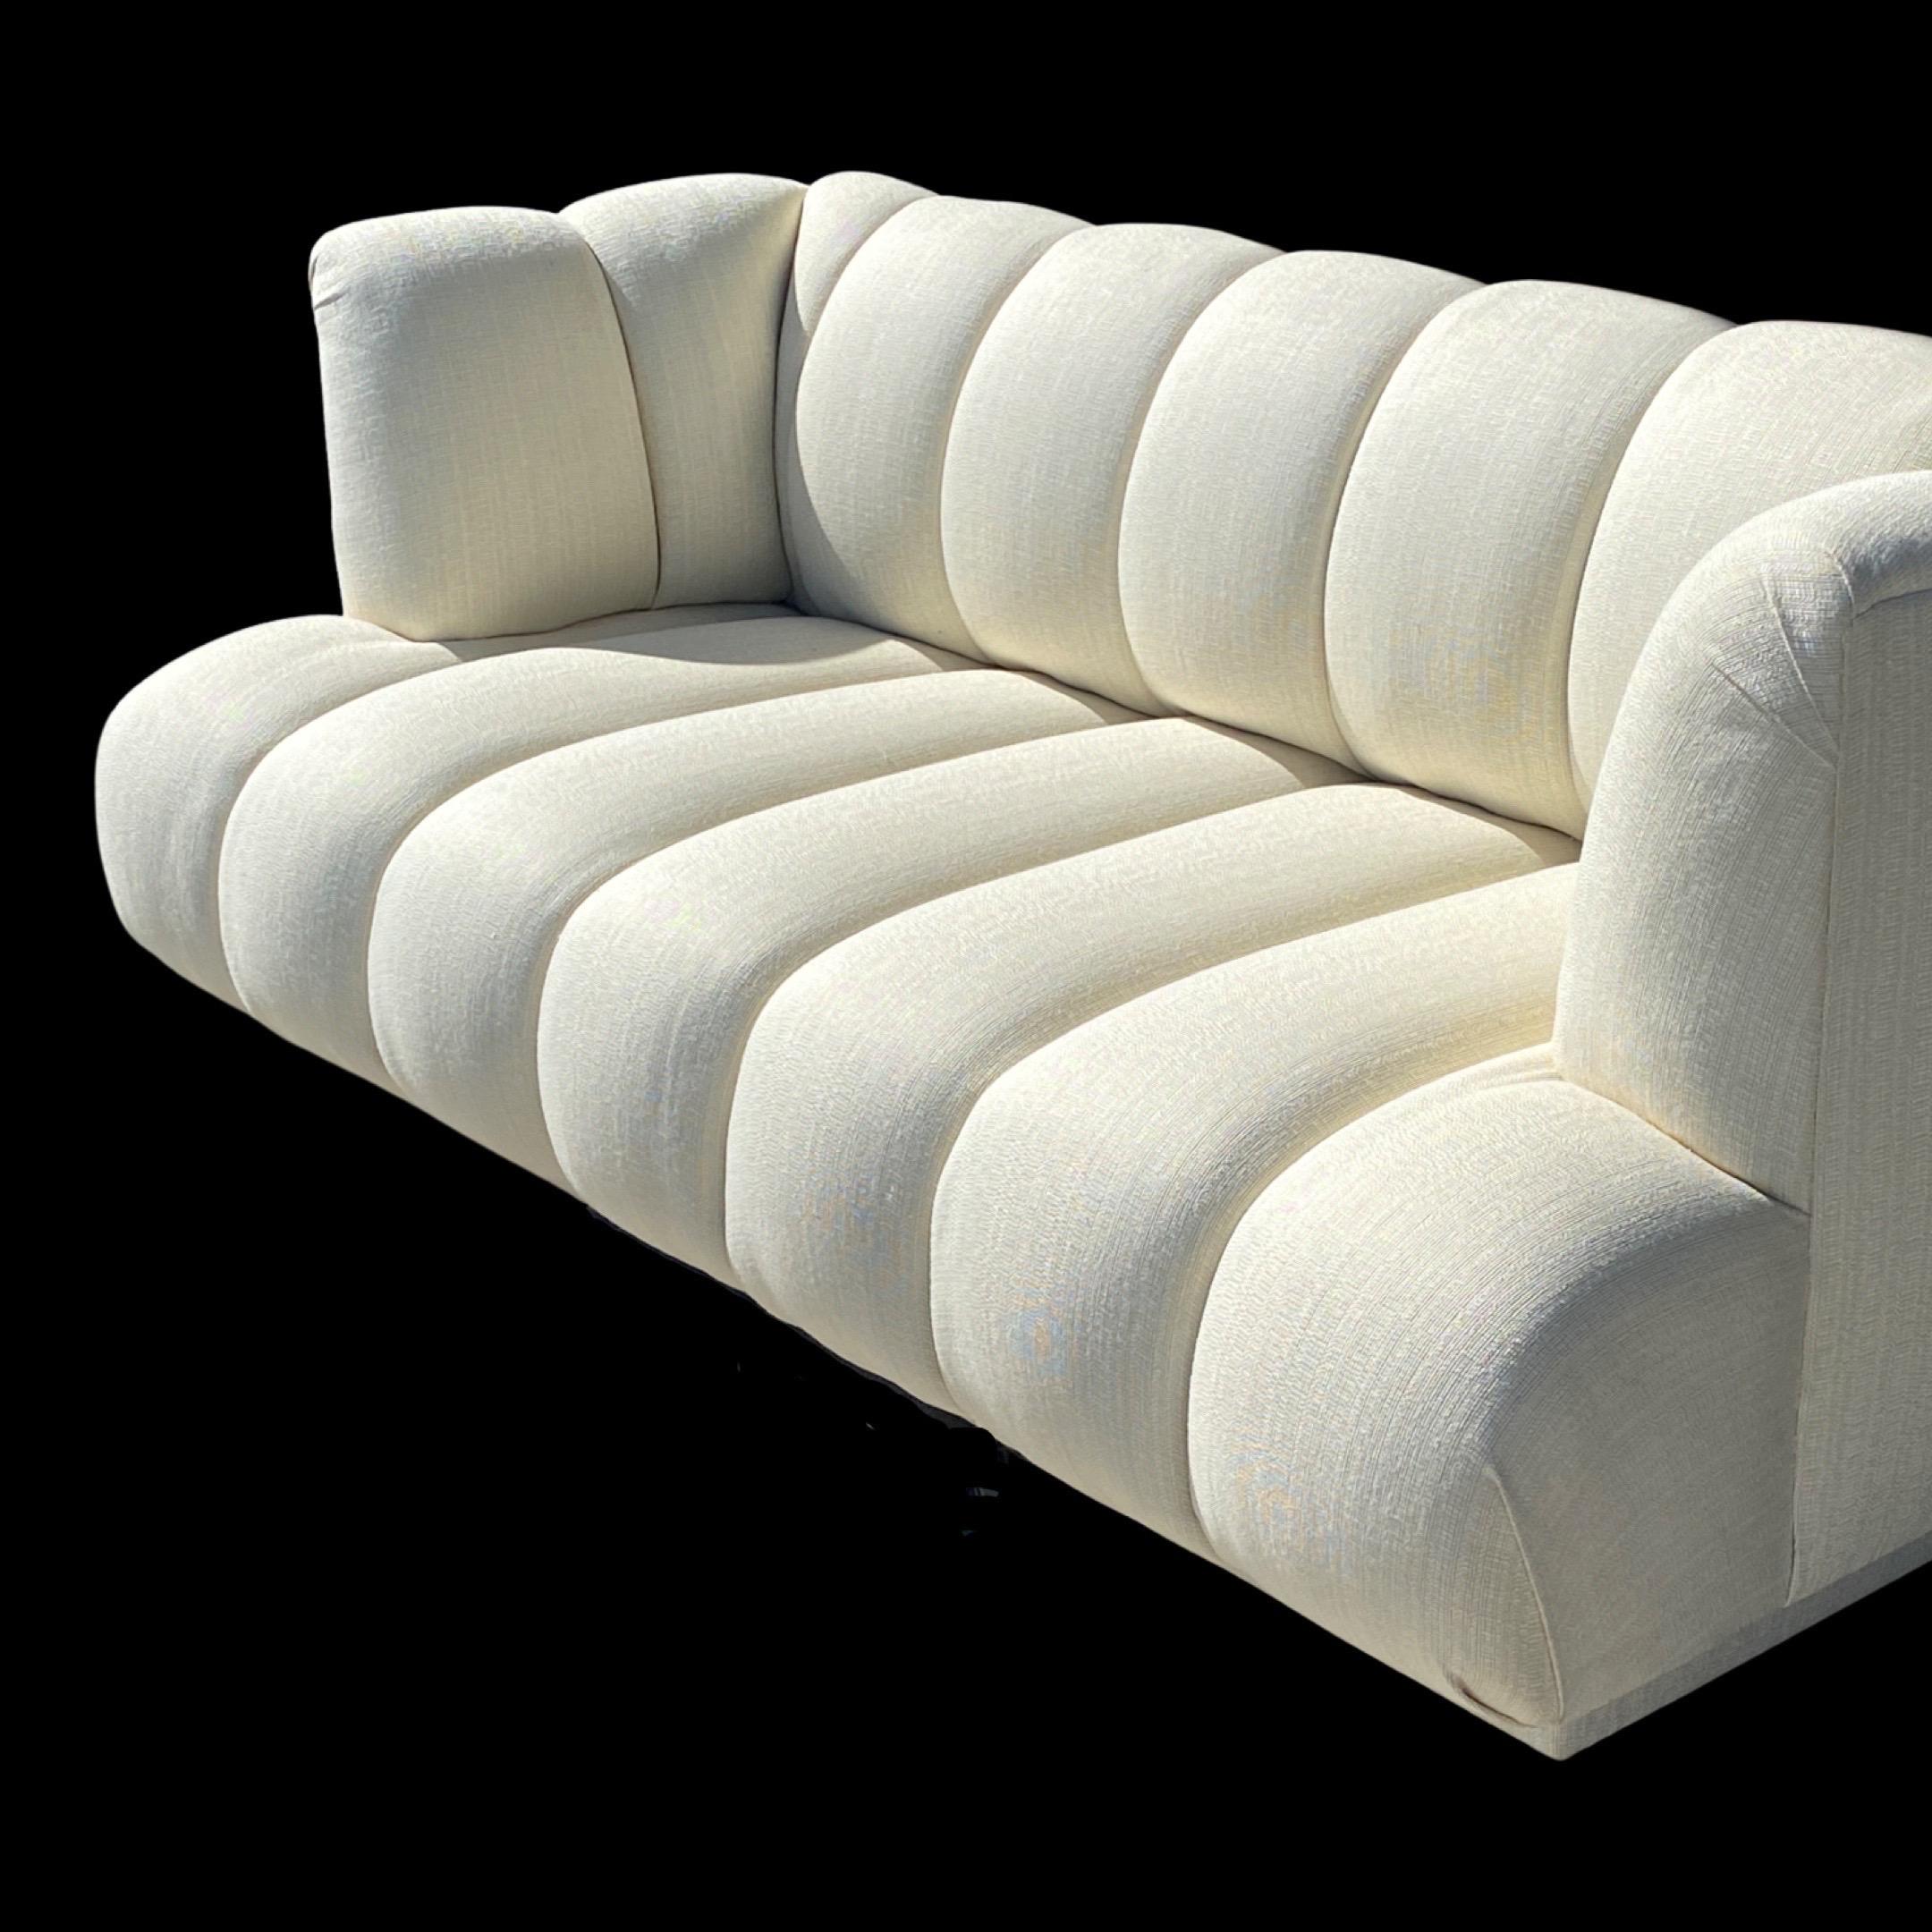 Steve Chase Iconic Channel Sofa From Celebrity Estate in New Creme Upholstery  For Sale 1